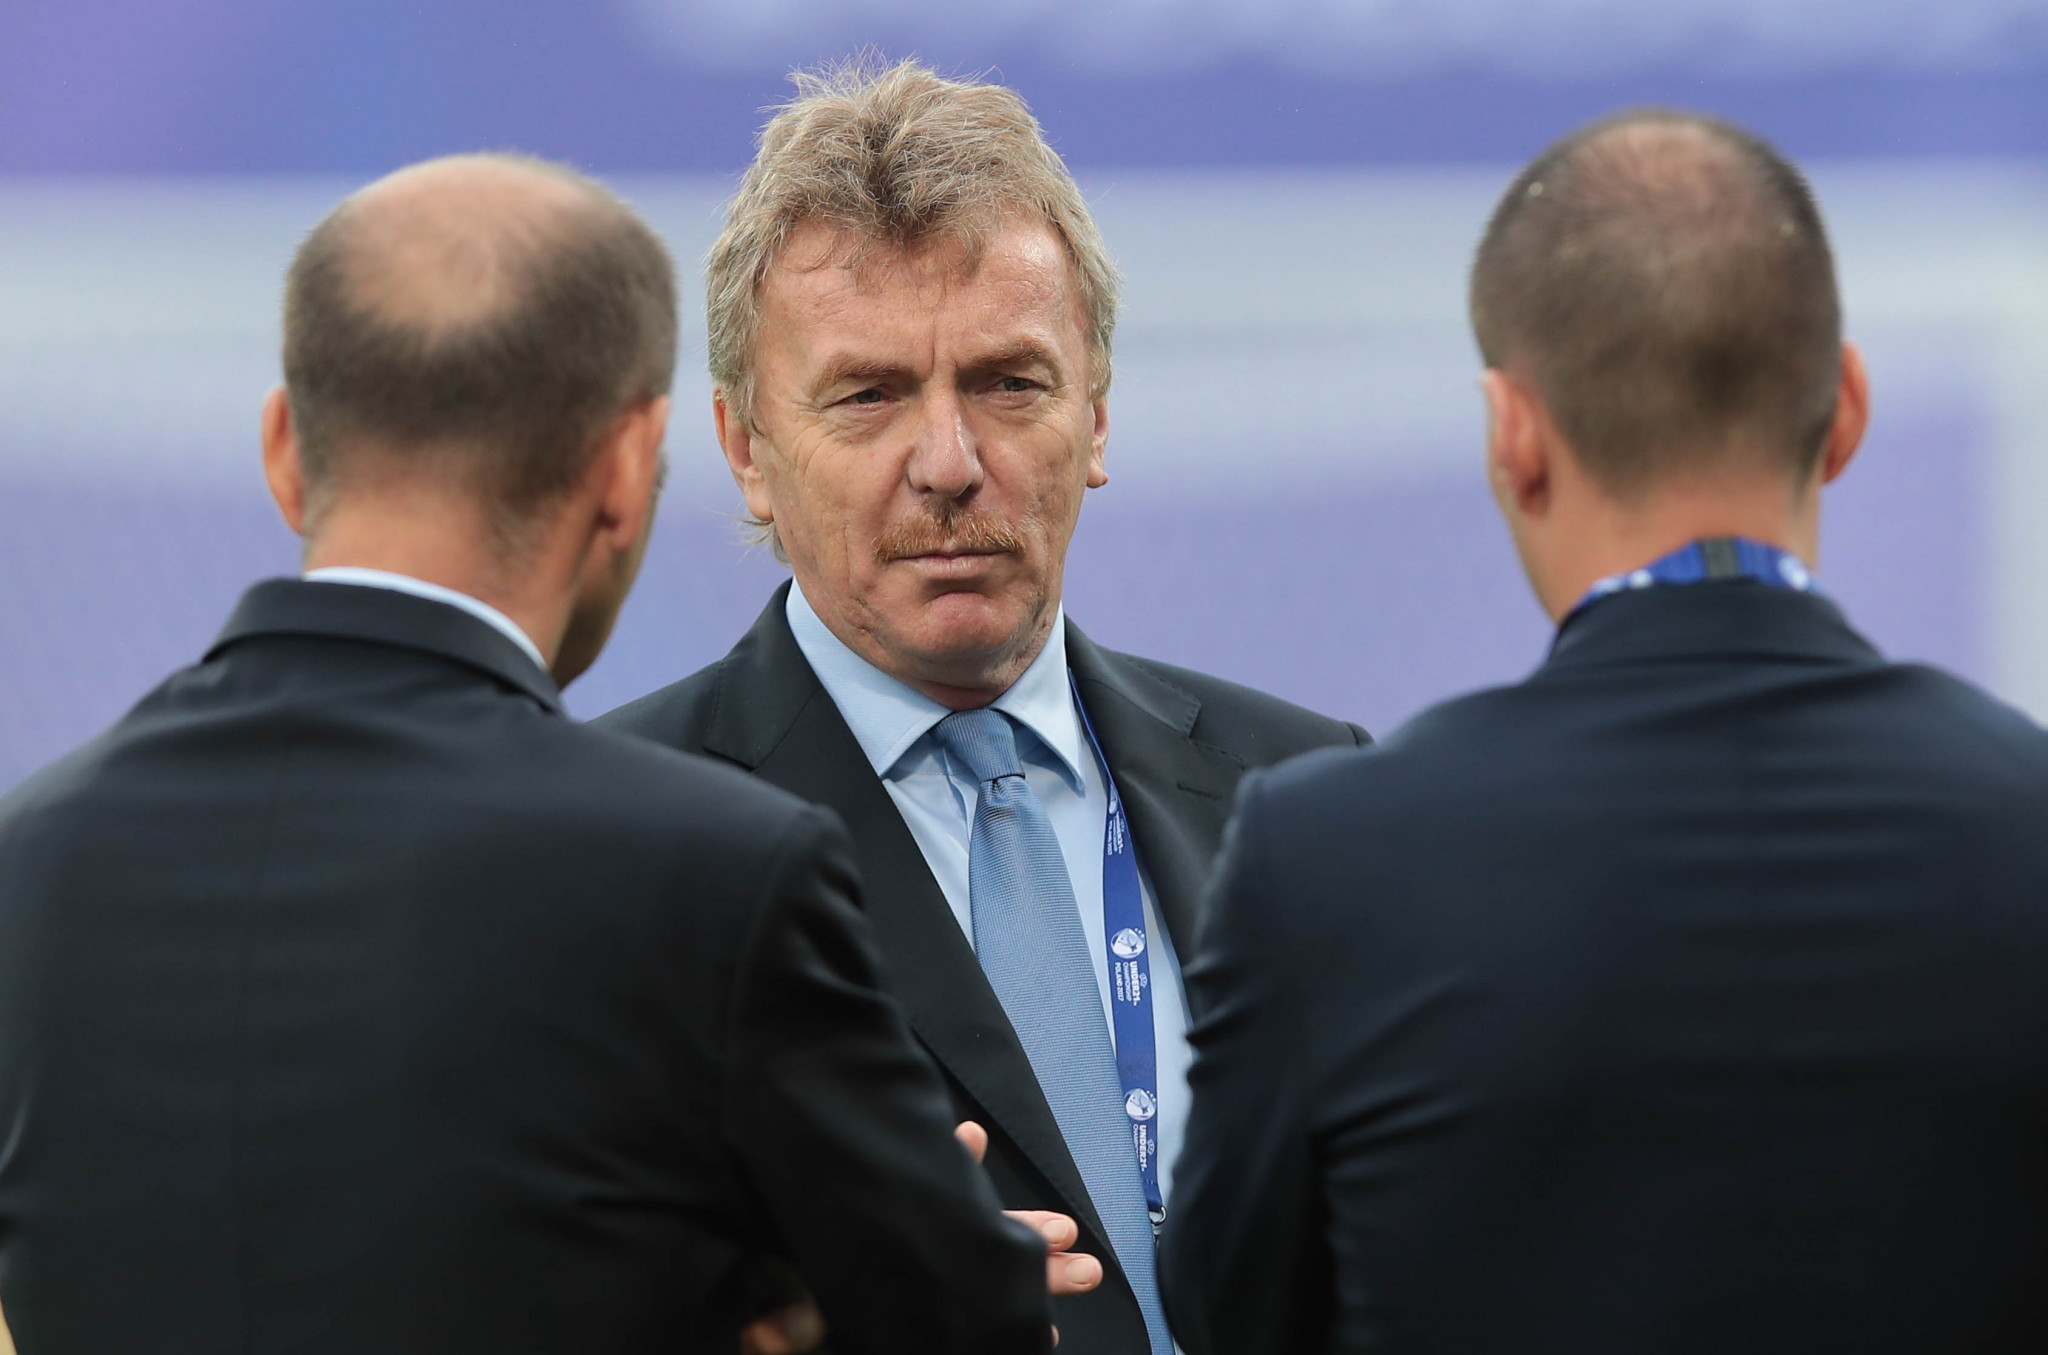 Candidates confirmed for UEFA Executive Committee positions